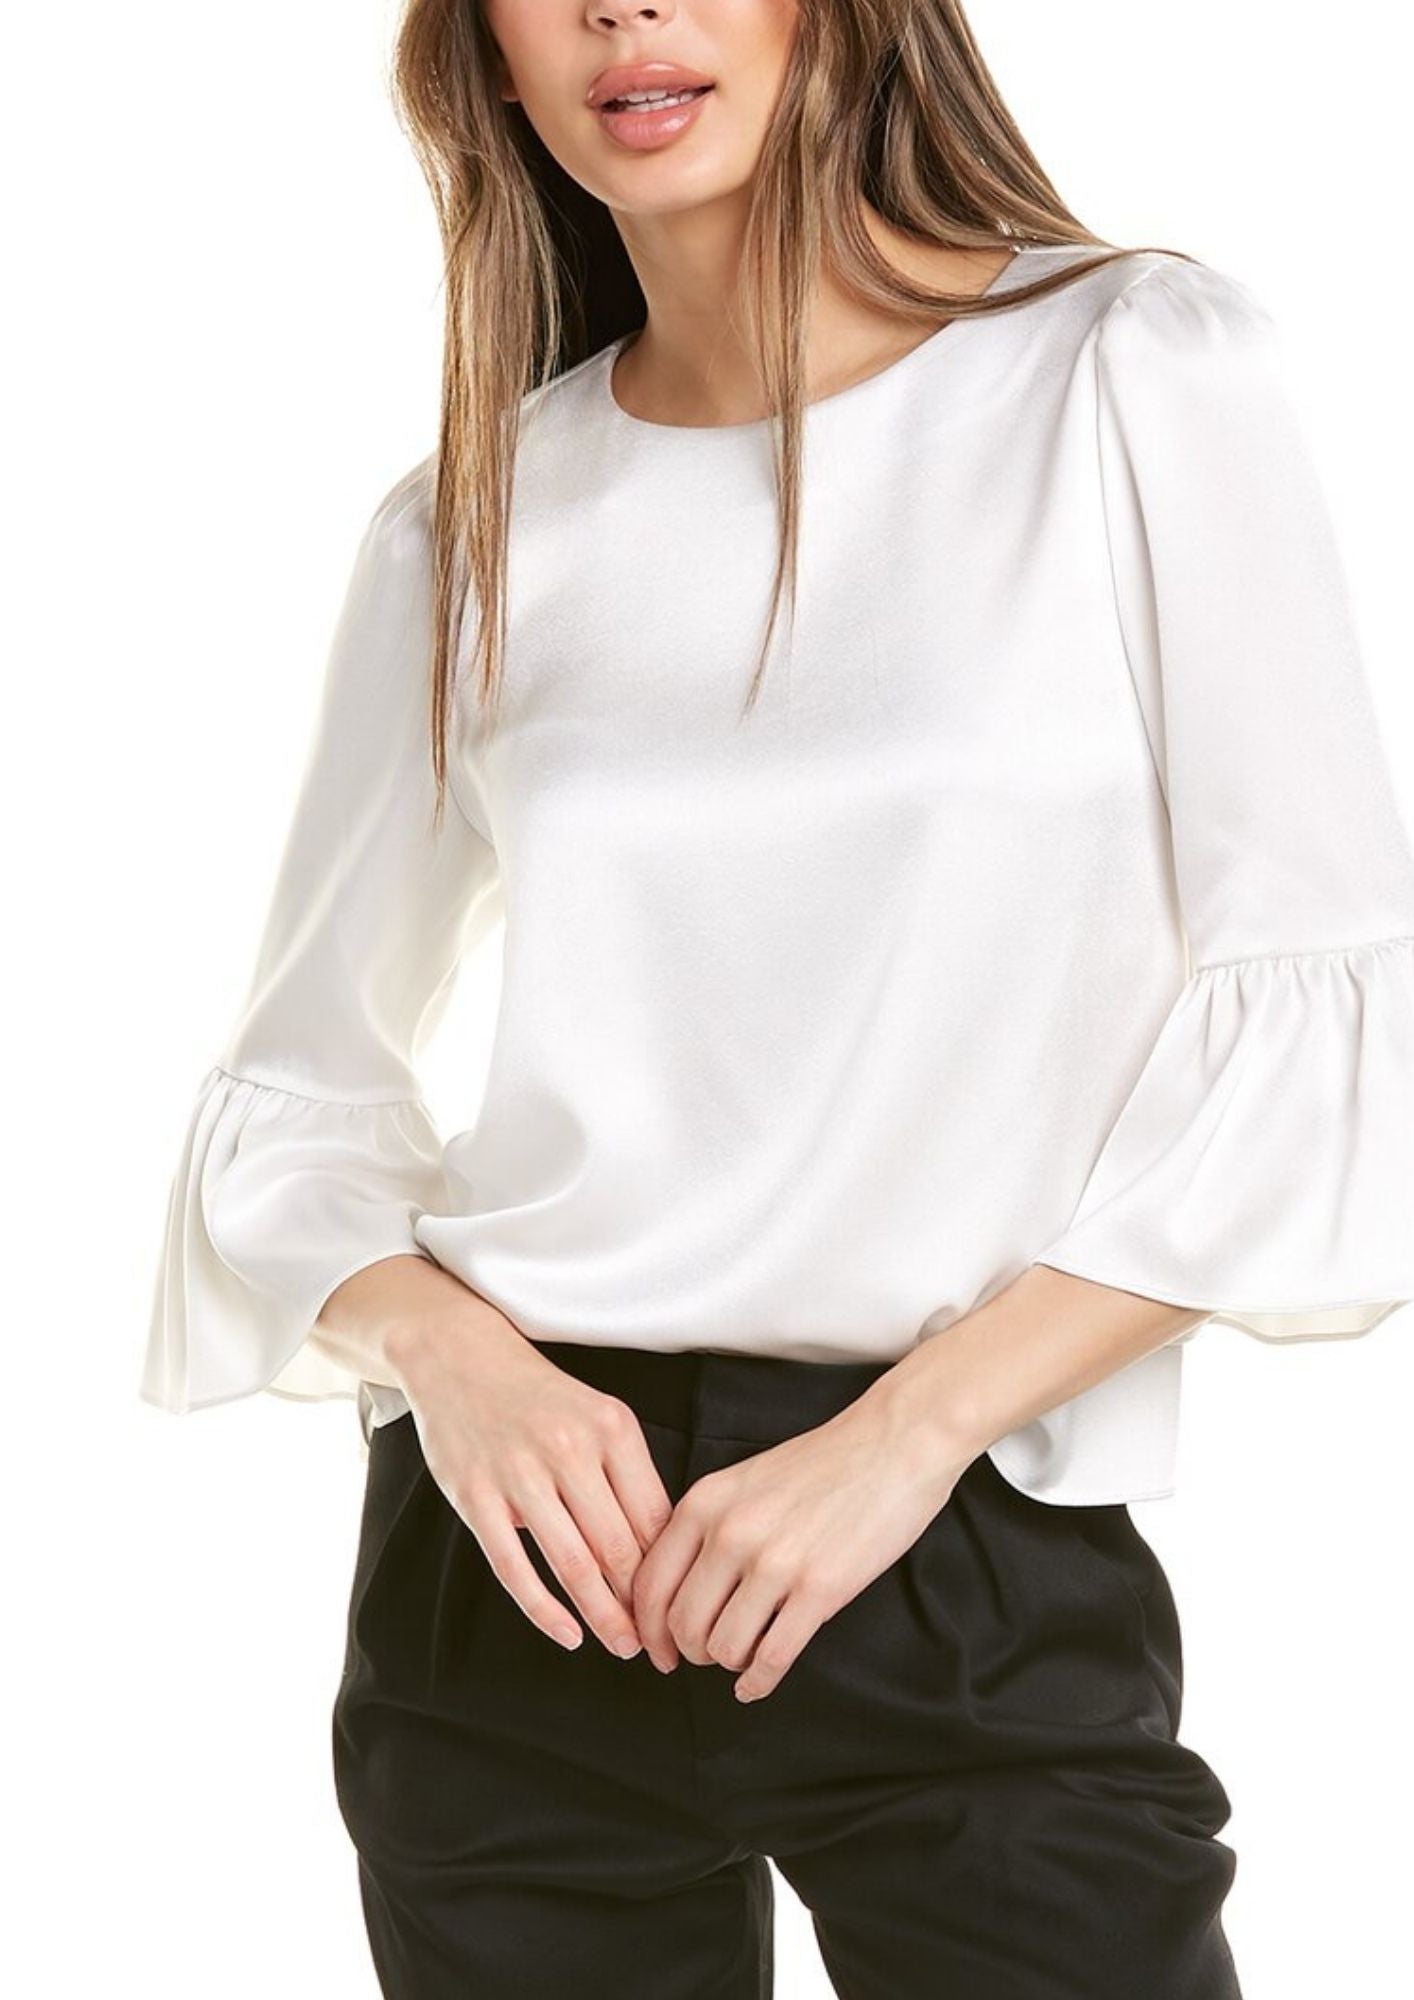 Simply Relaxed White Top